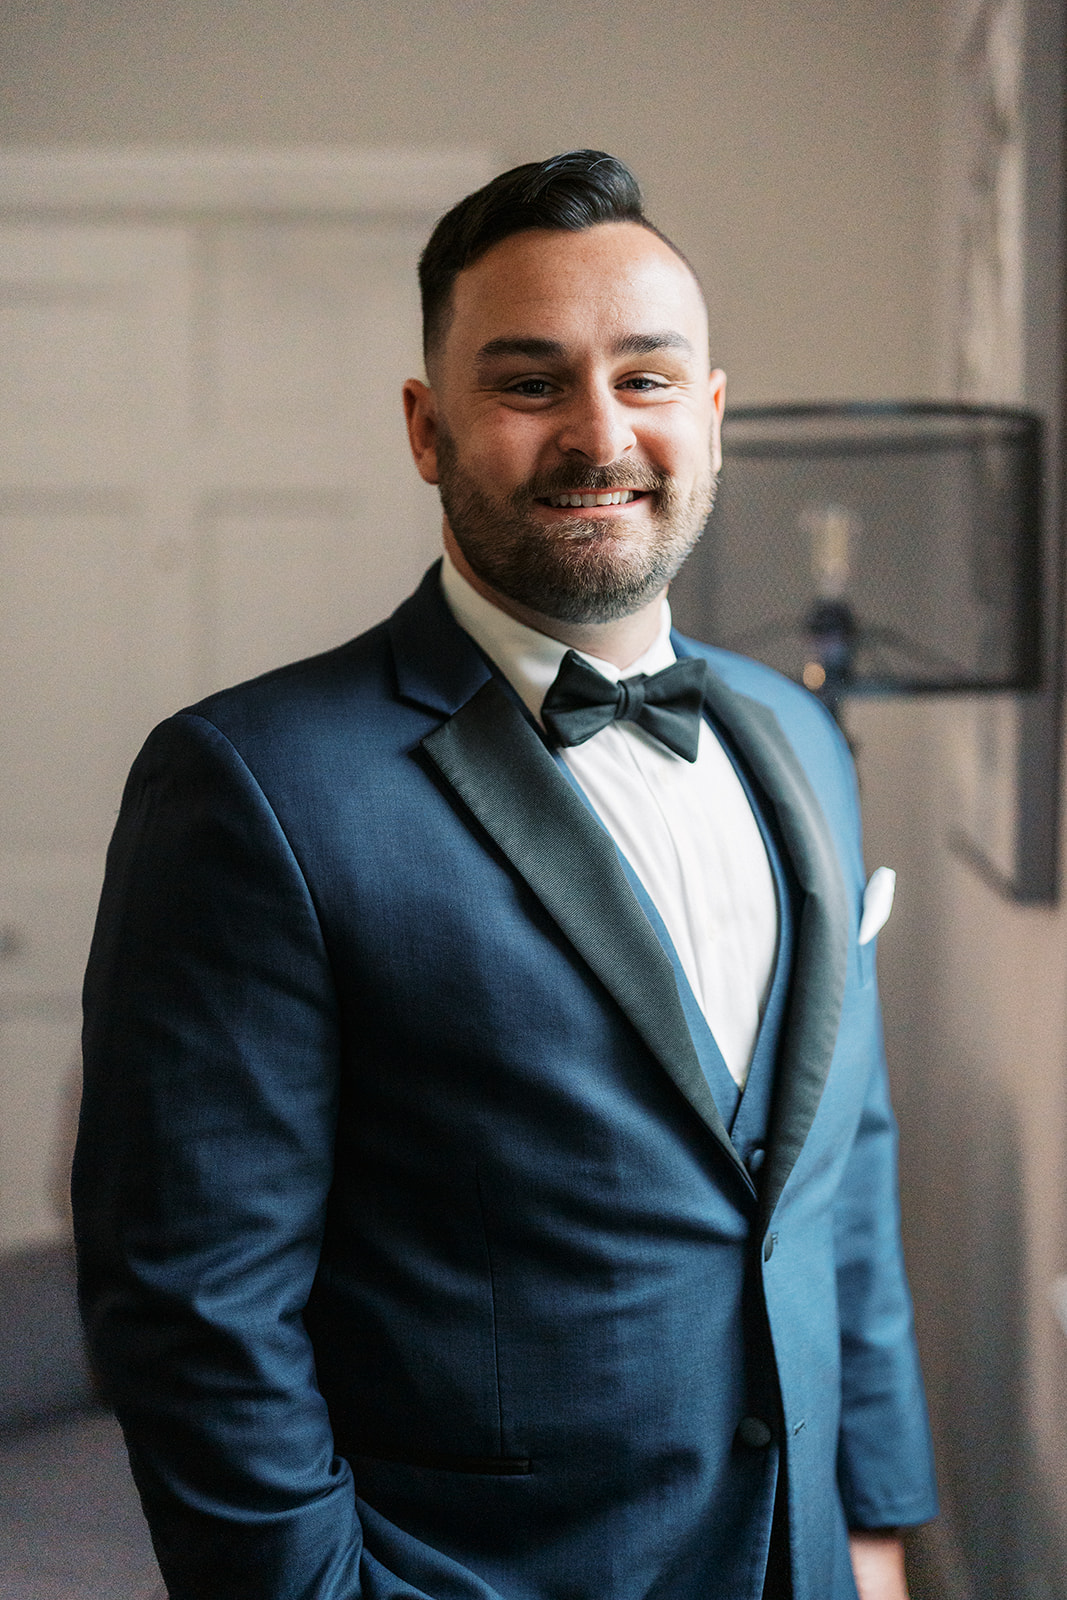 A groom smilies while standing in a window in a blue suit